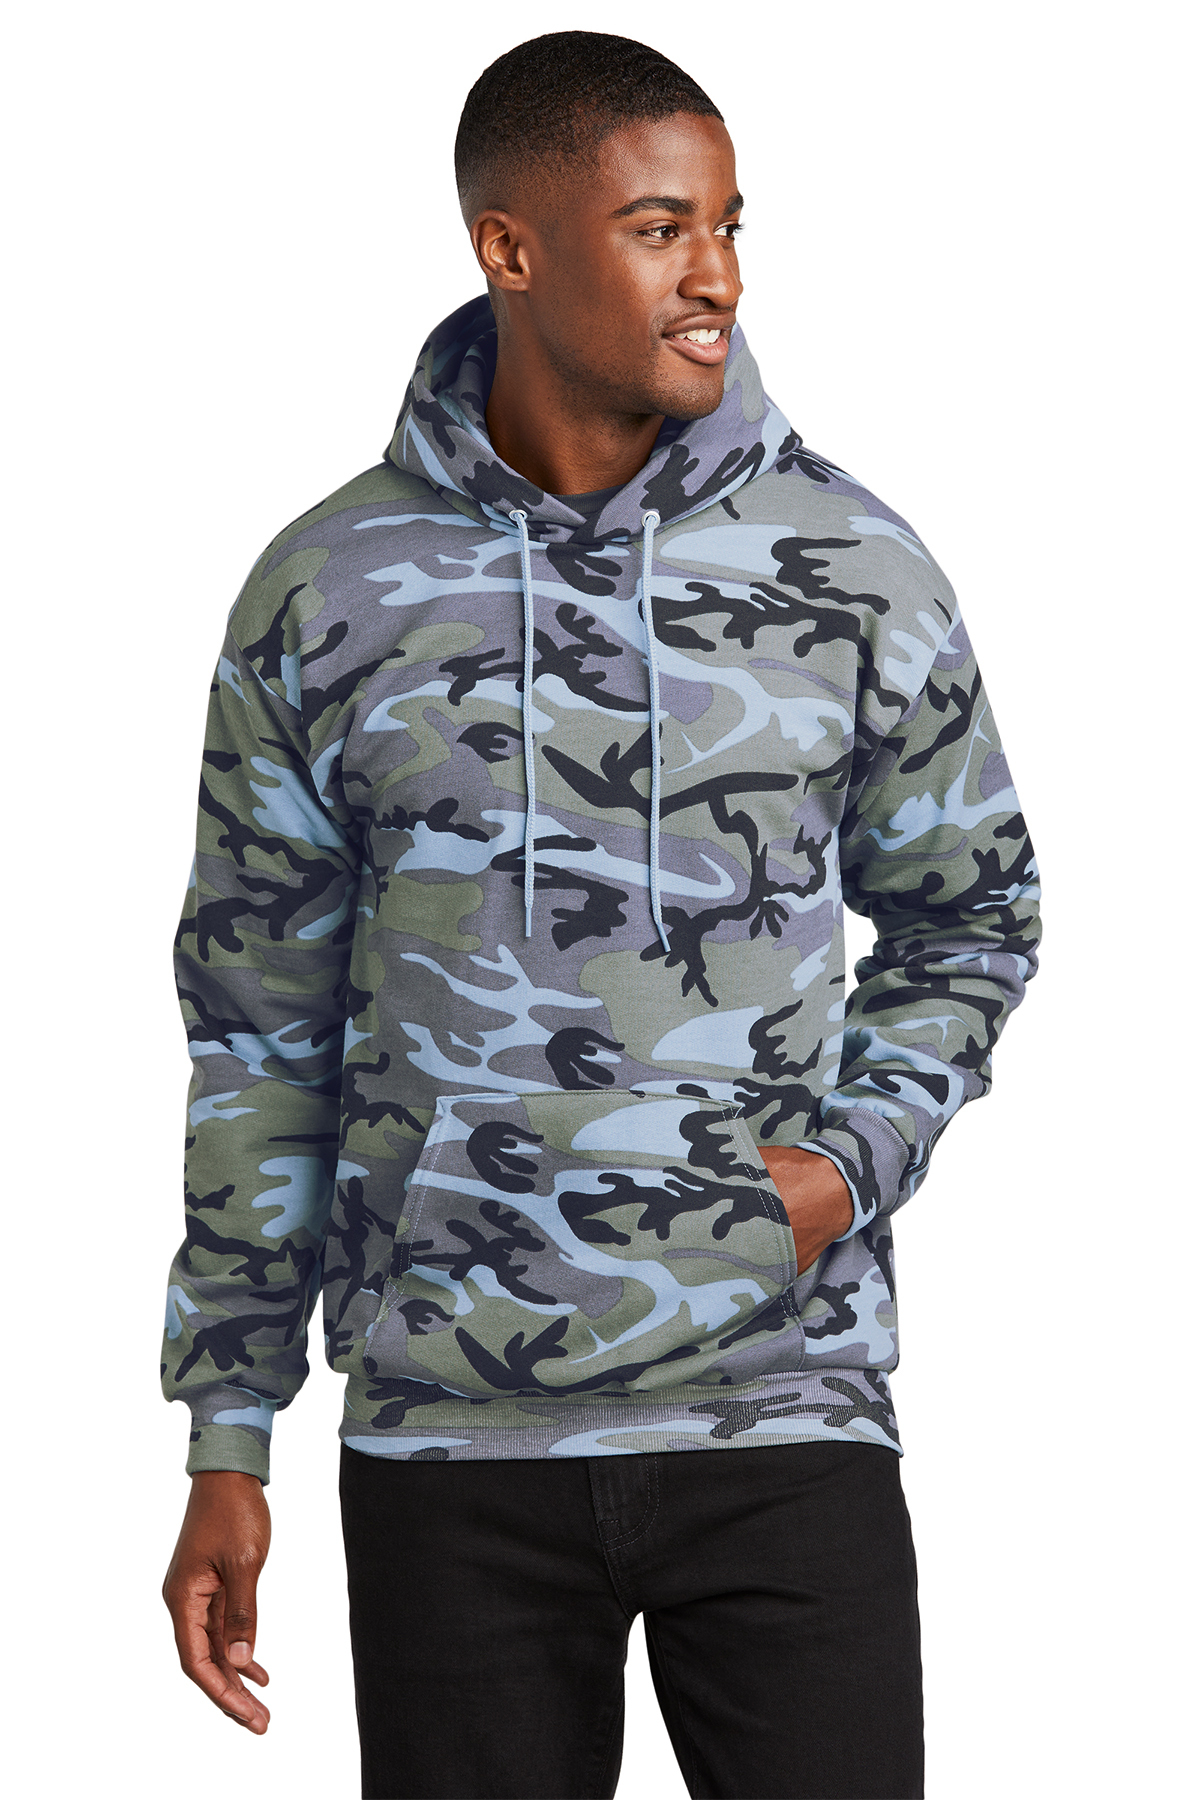 charter card Junction camouflage hoodie passionate Head climax